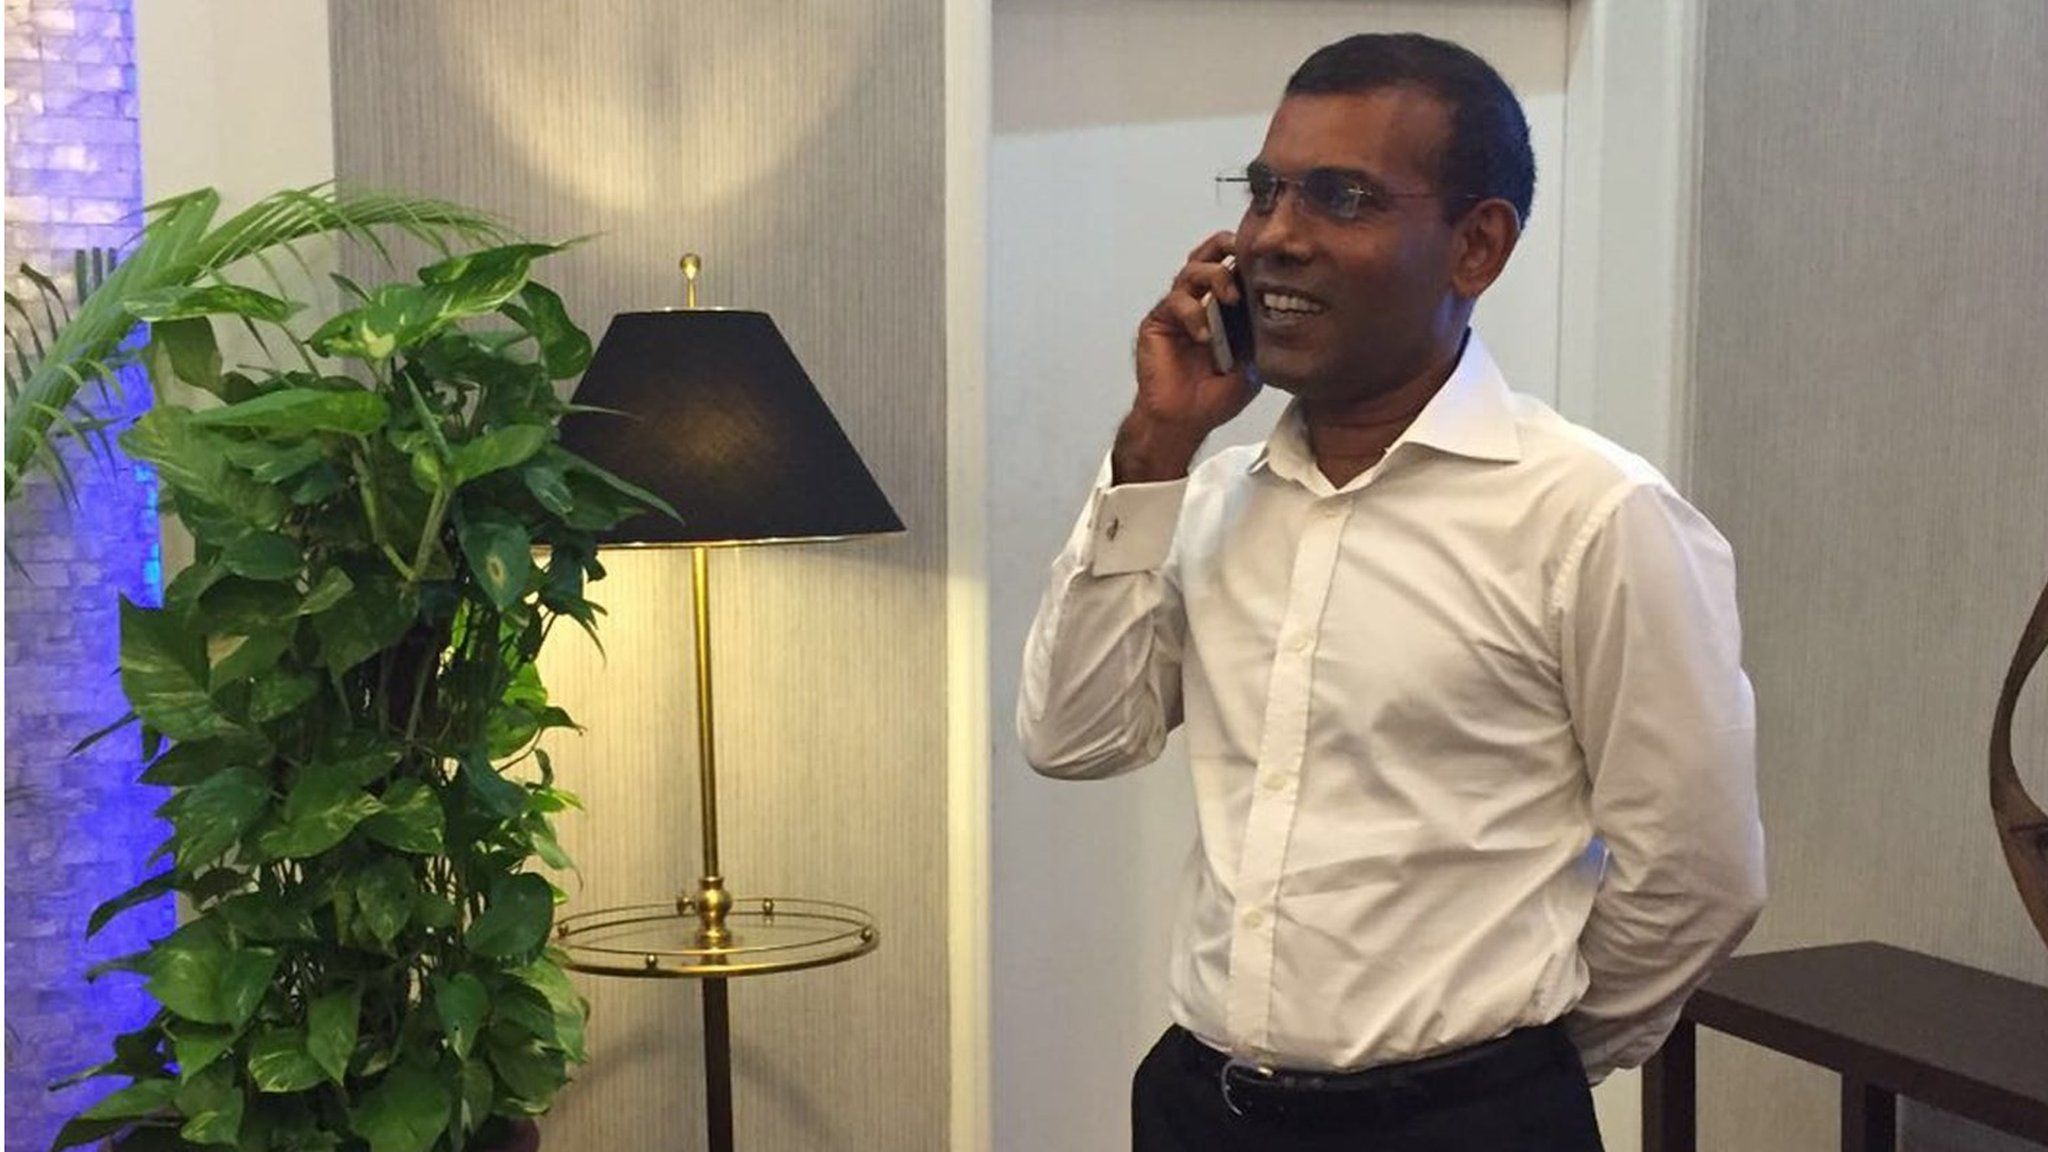 opposition leader Mohamed Nasheed talks on the phone as he prepares to leave the Maldives (MDP handout) (18 January 2016)